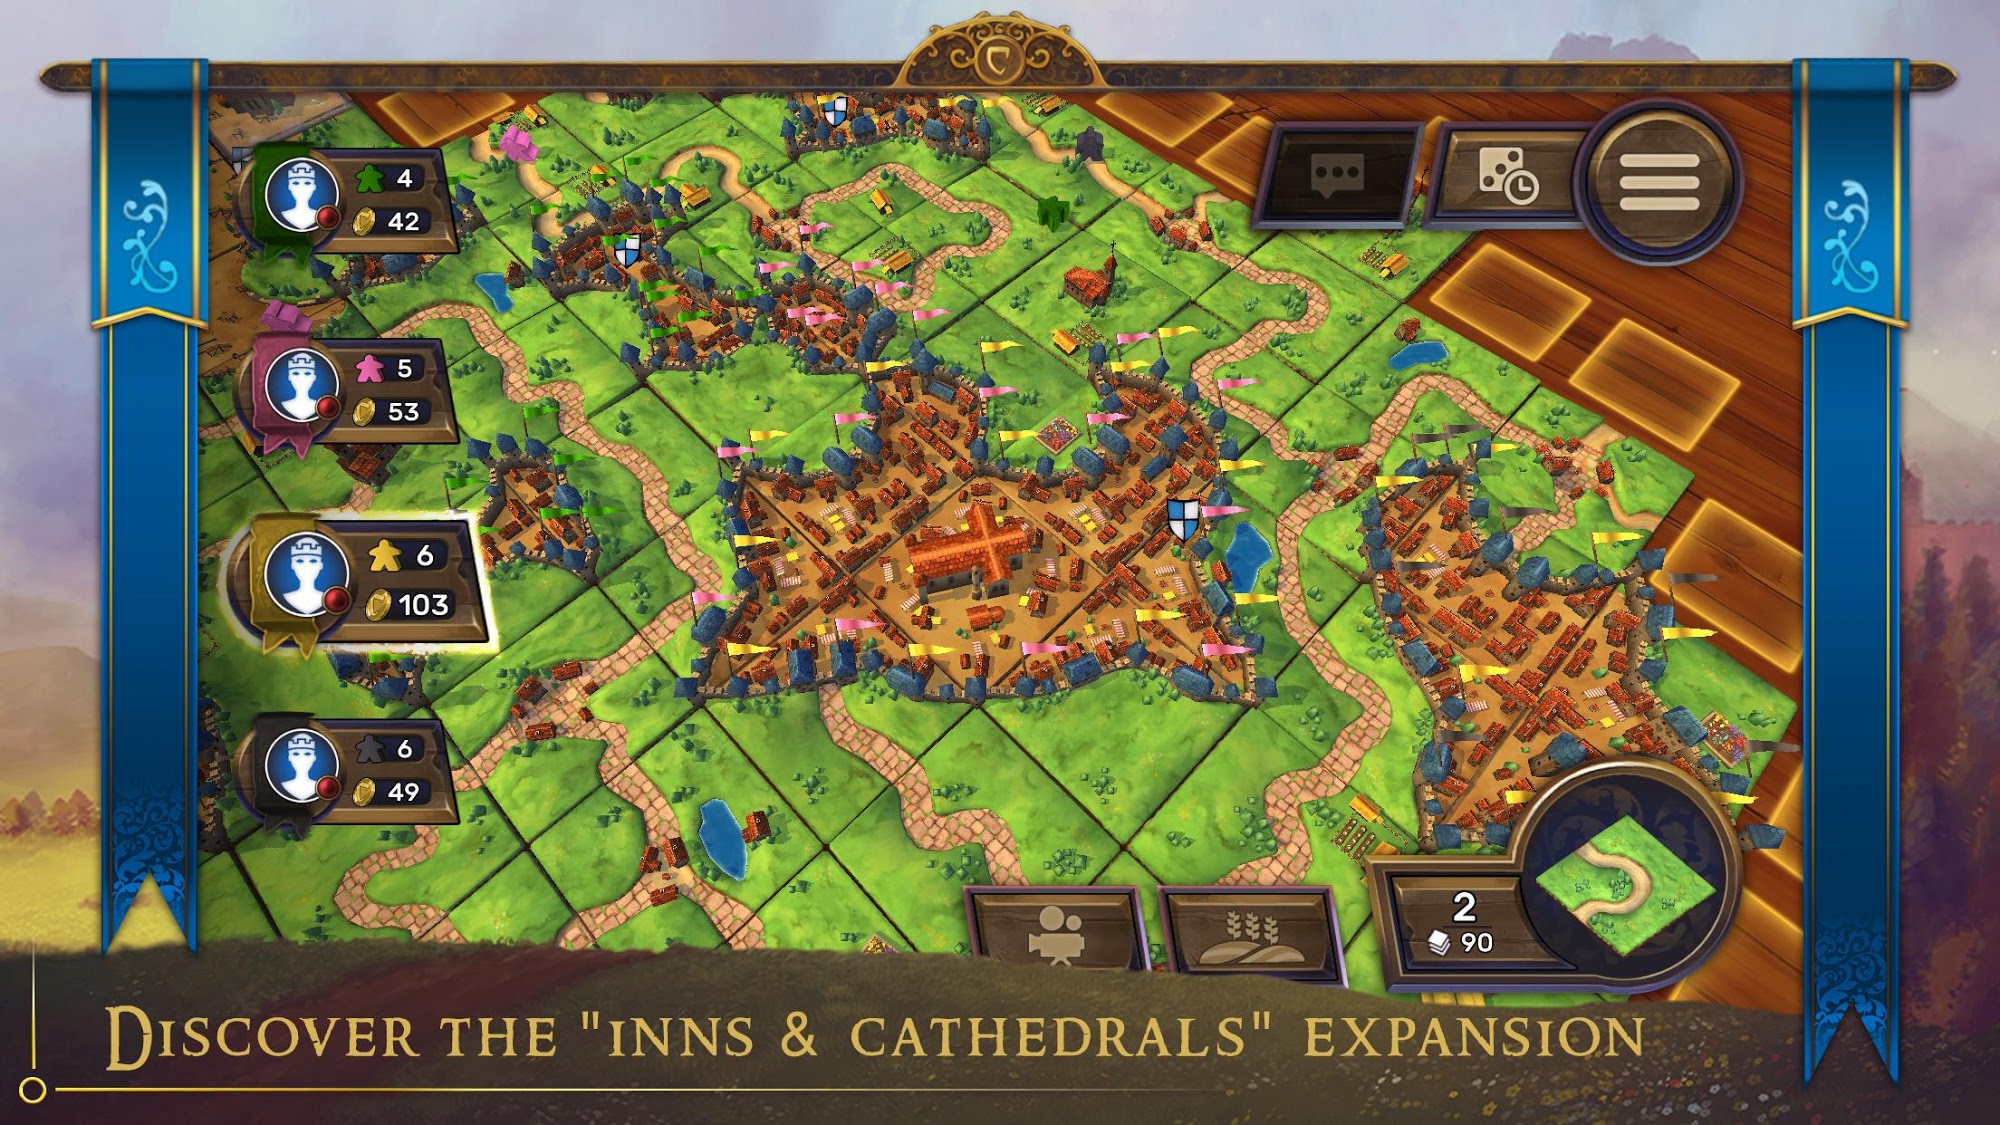 Carcassonne: Official Board Game -Tiles & Tactics for Android